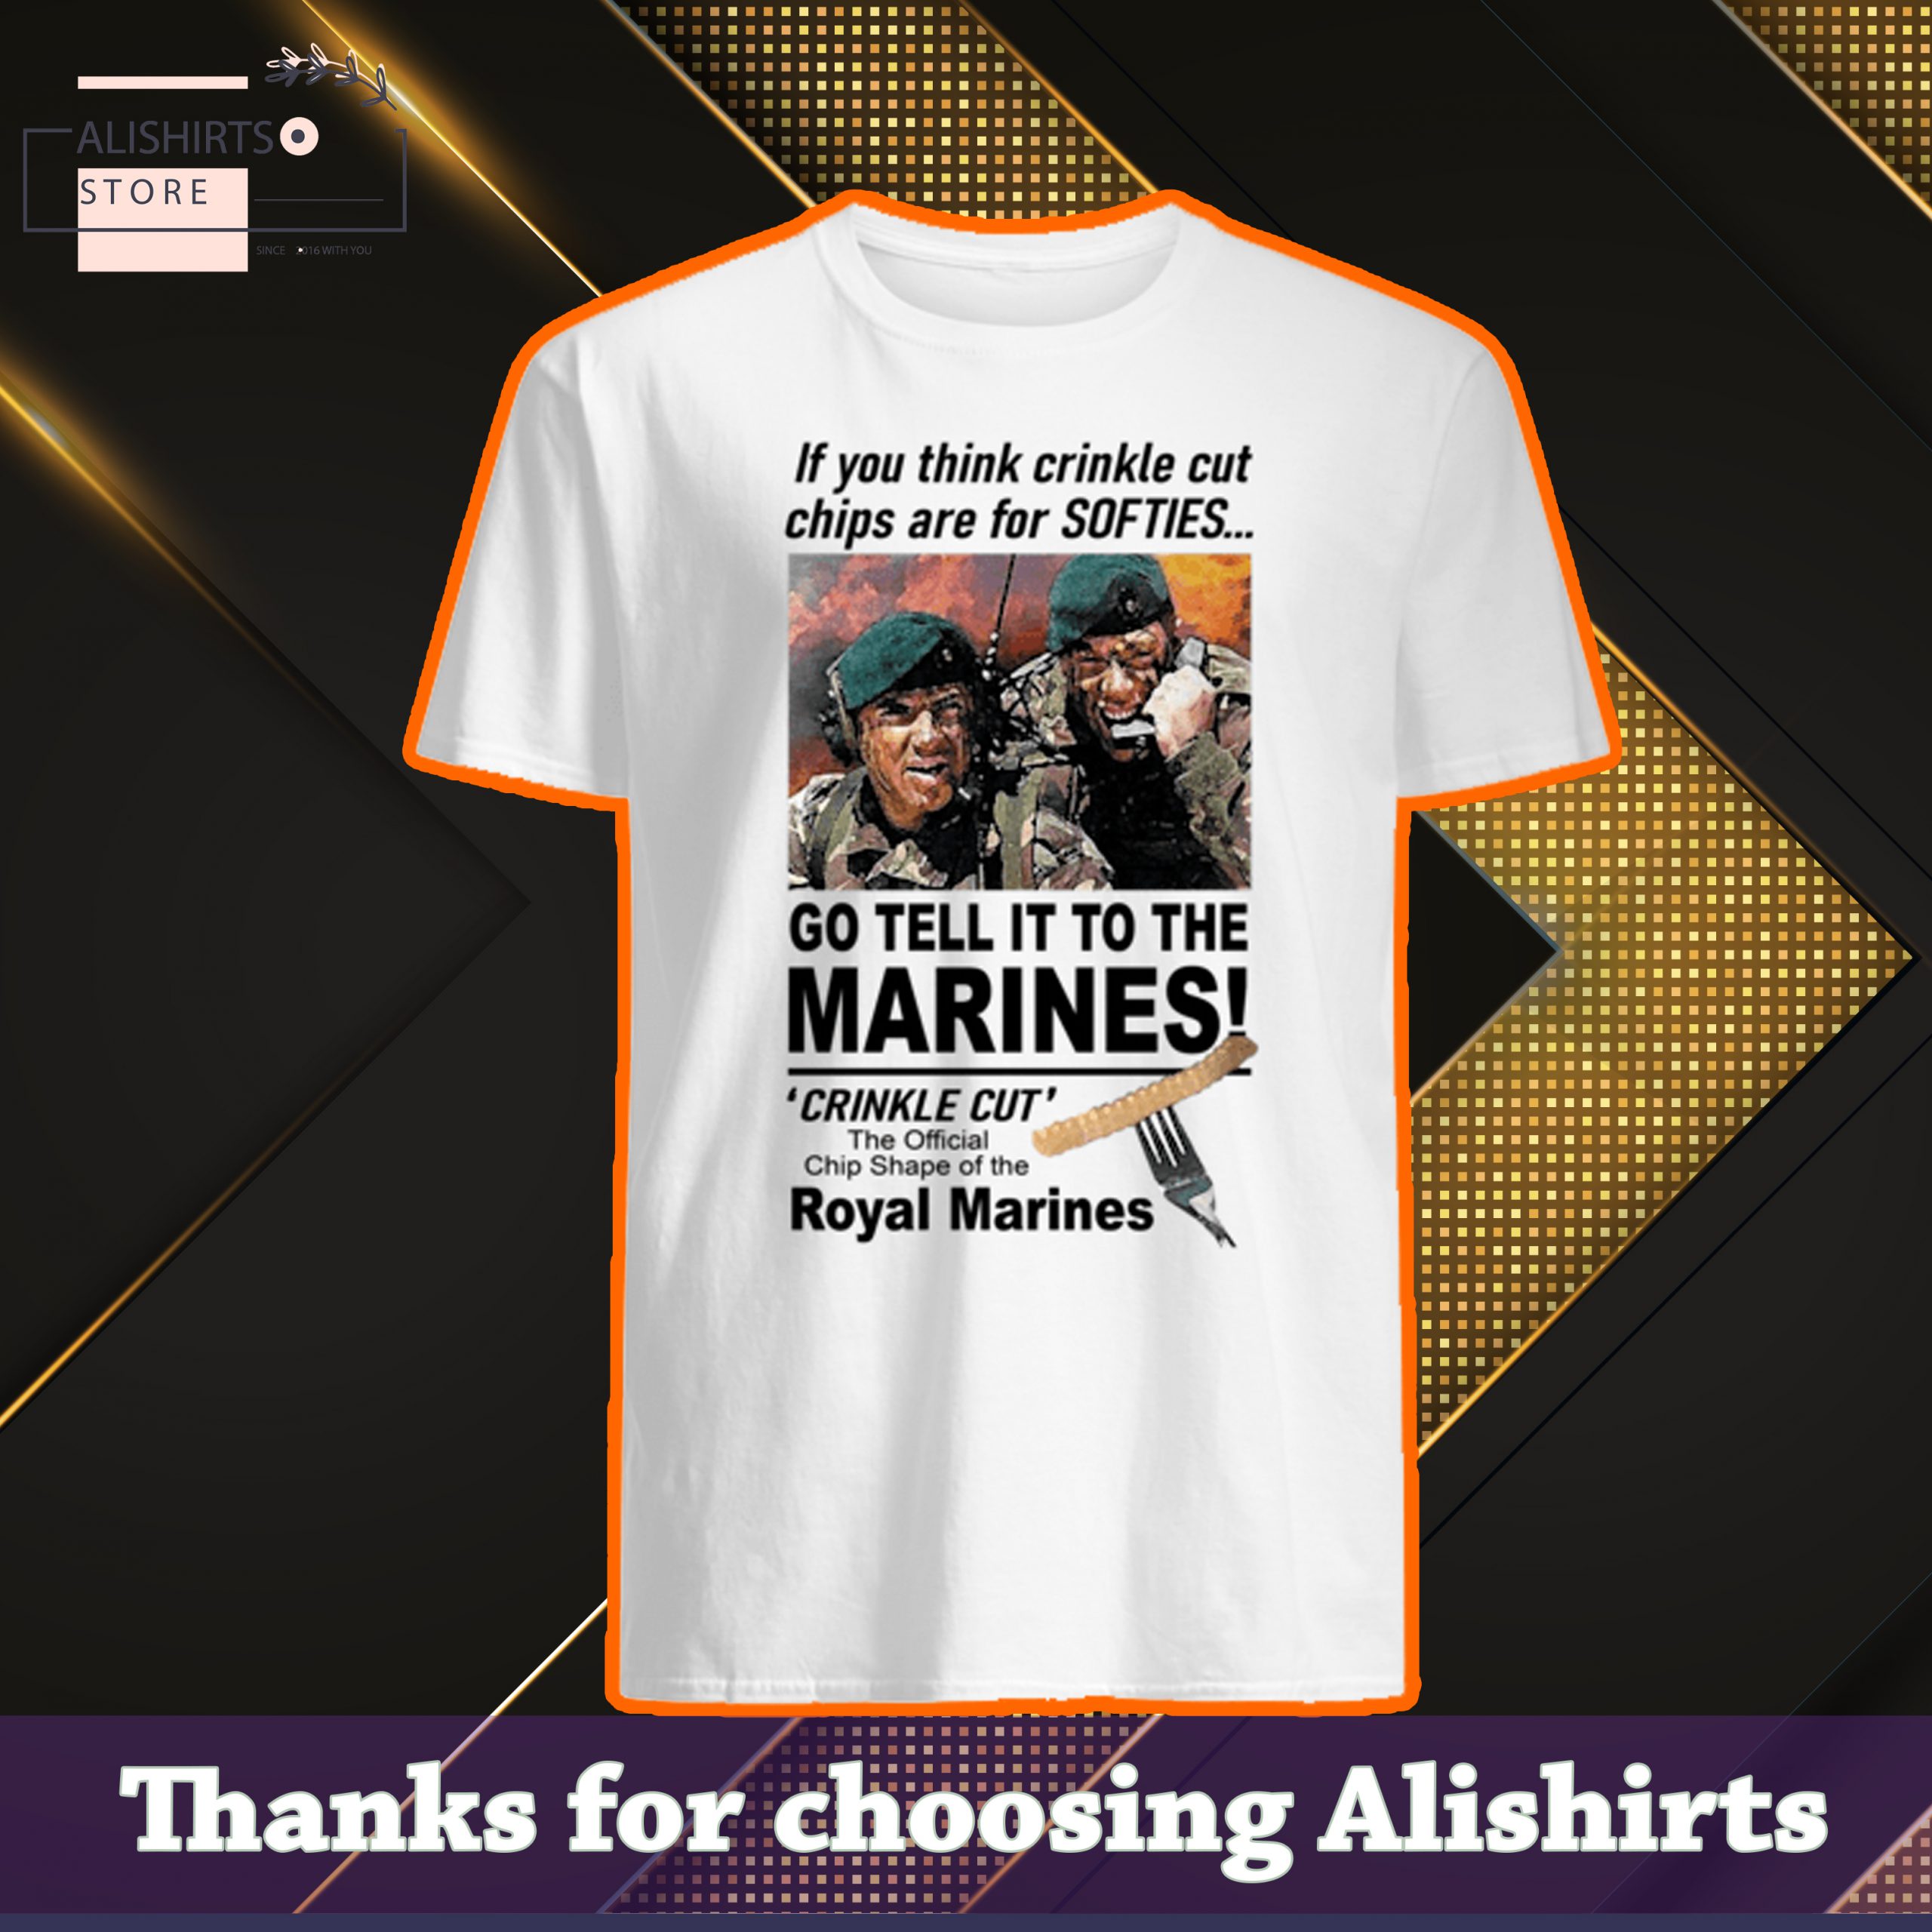 If you think crinkle cut chips are for softies go tell it to the marines shirt